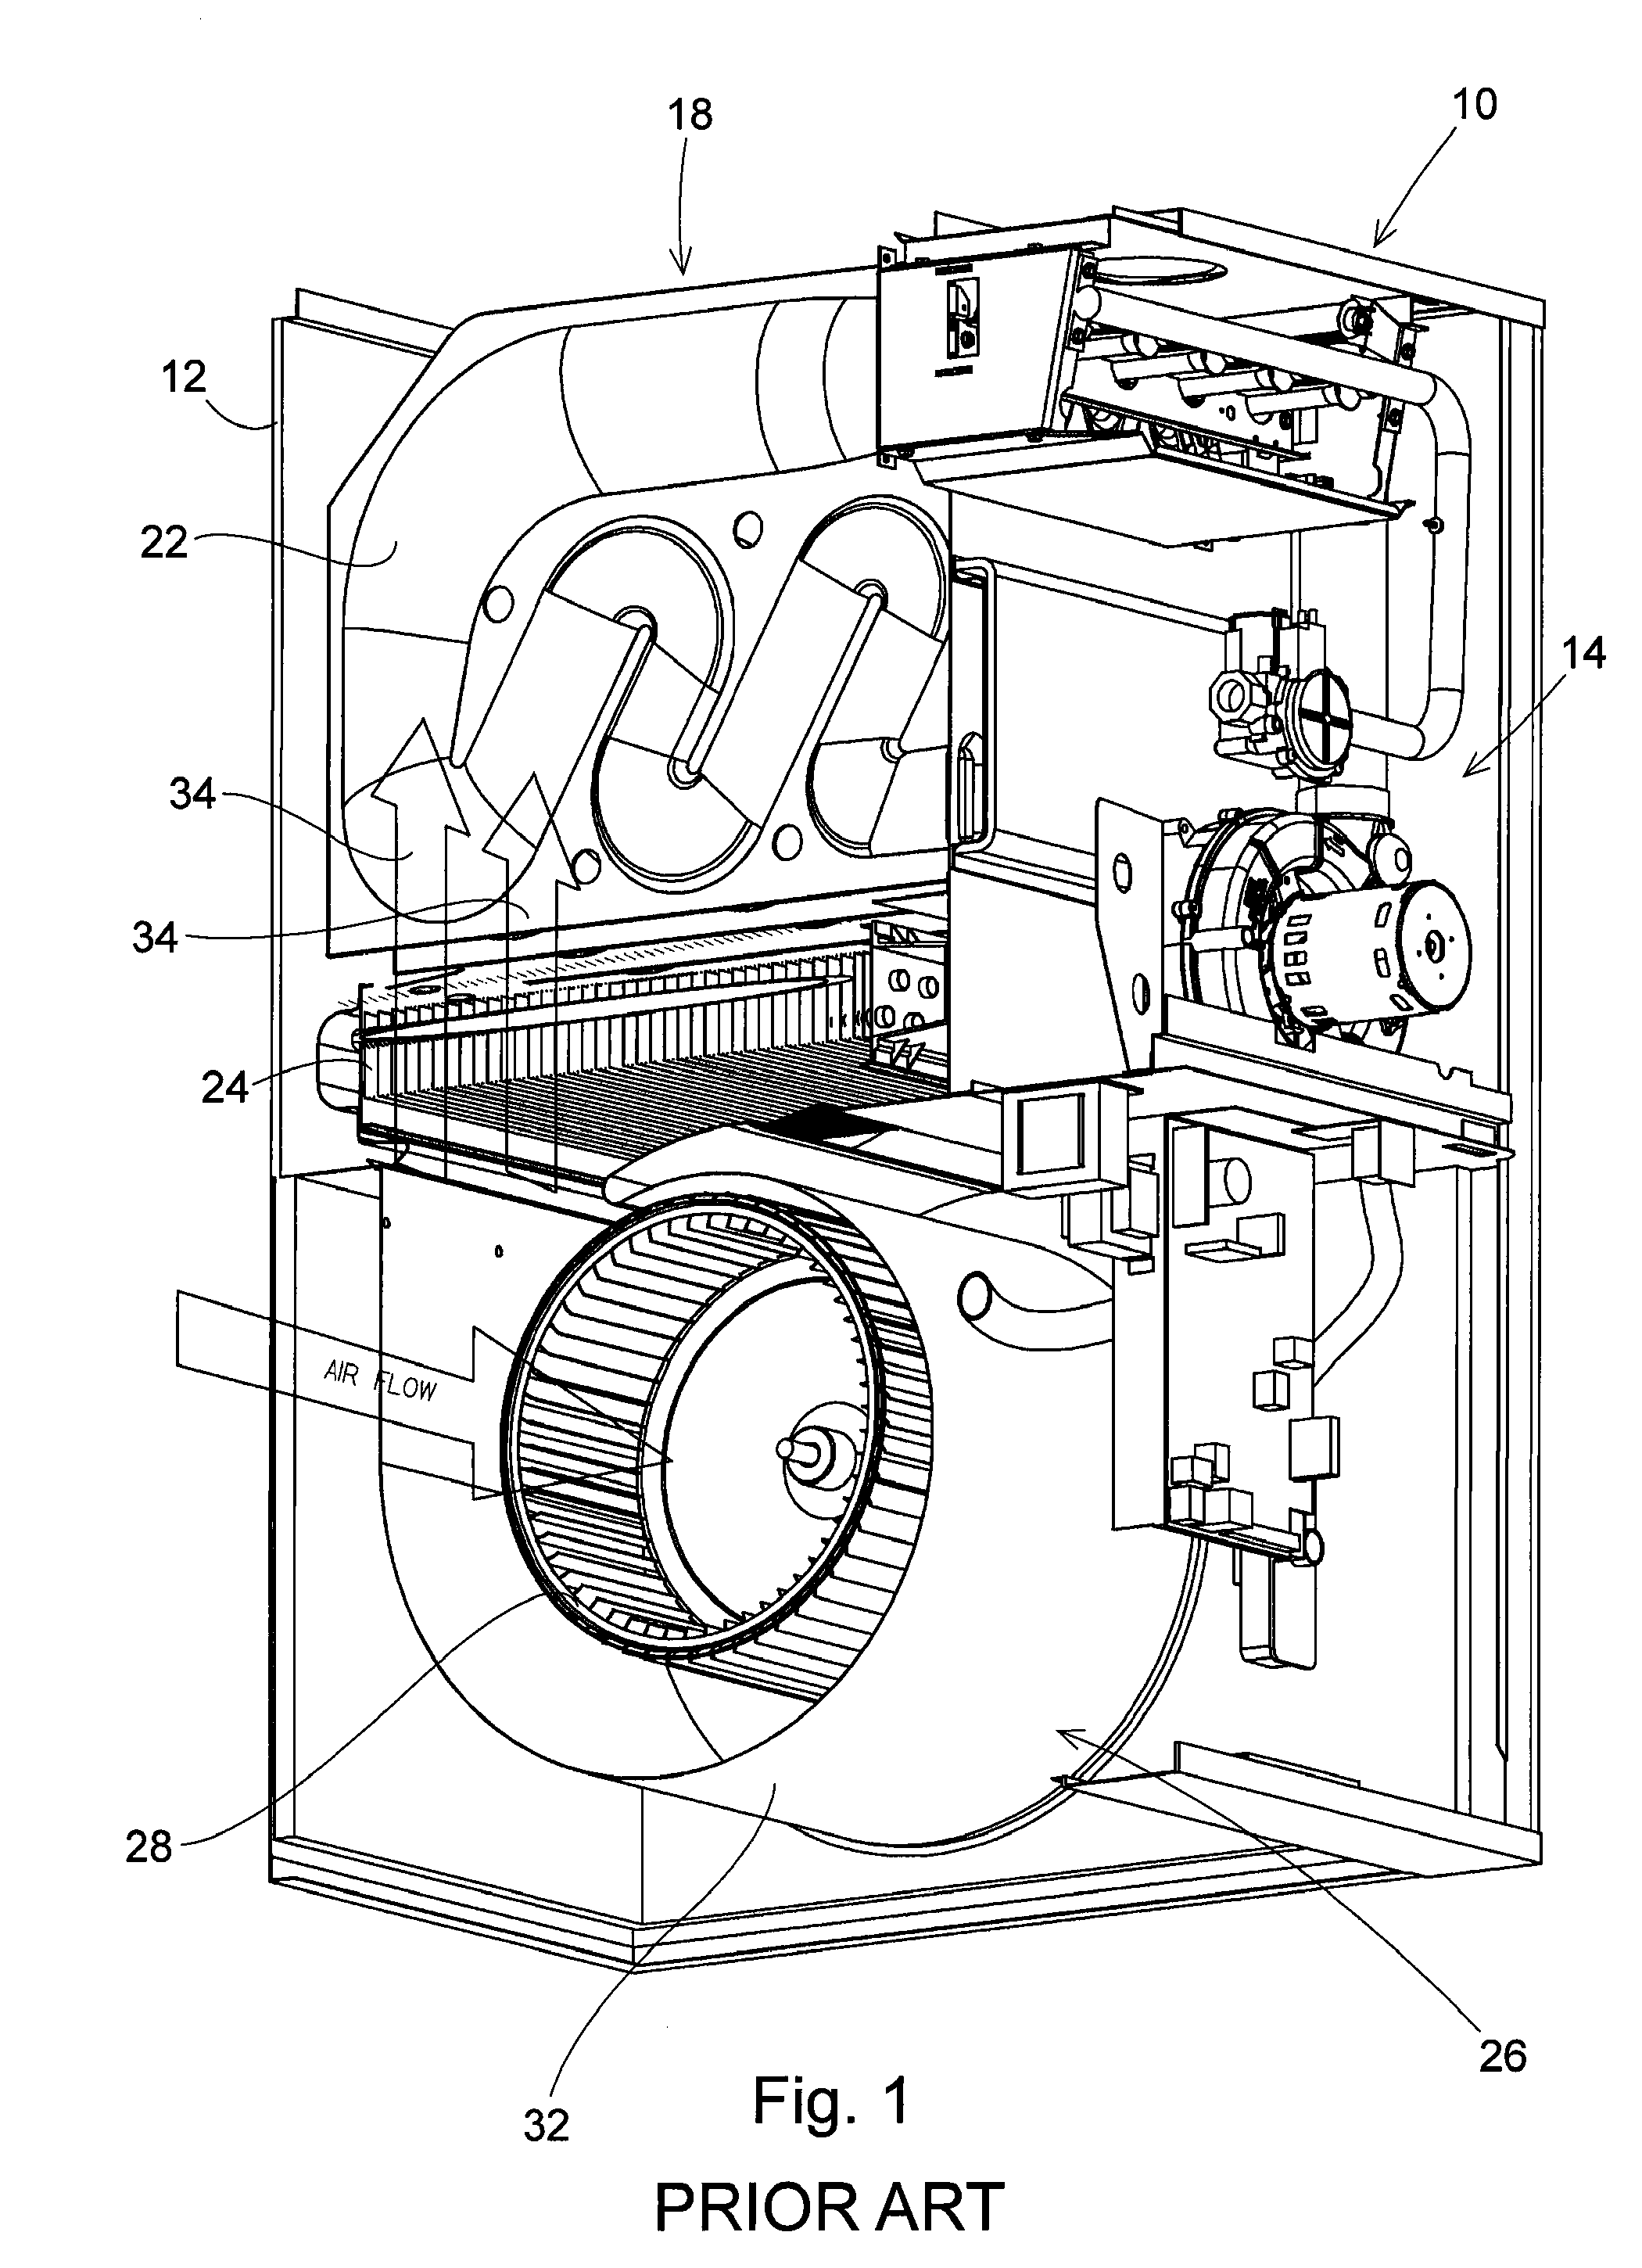 Furnace Air Handler Blower Housing with an Enlarged Air Outlet Opening